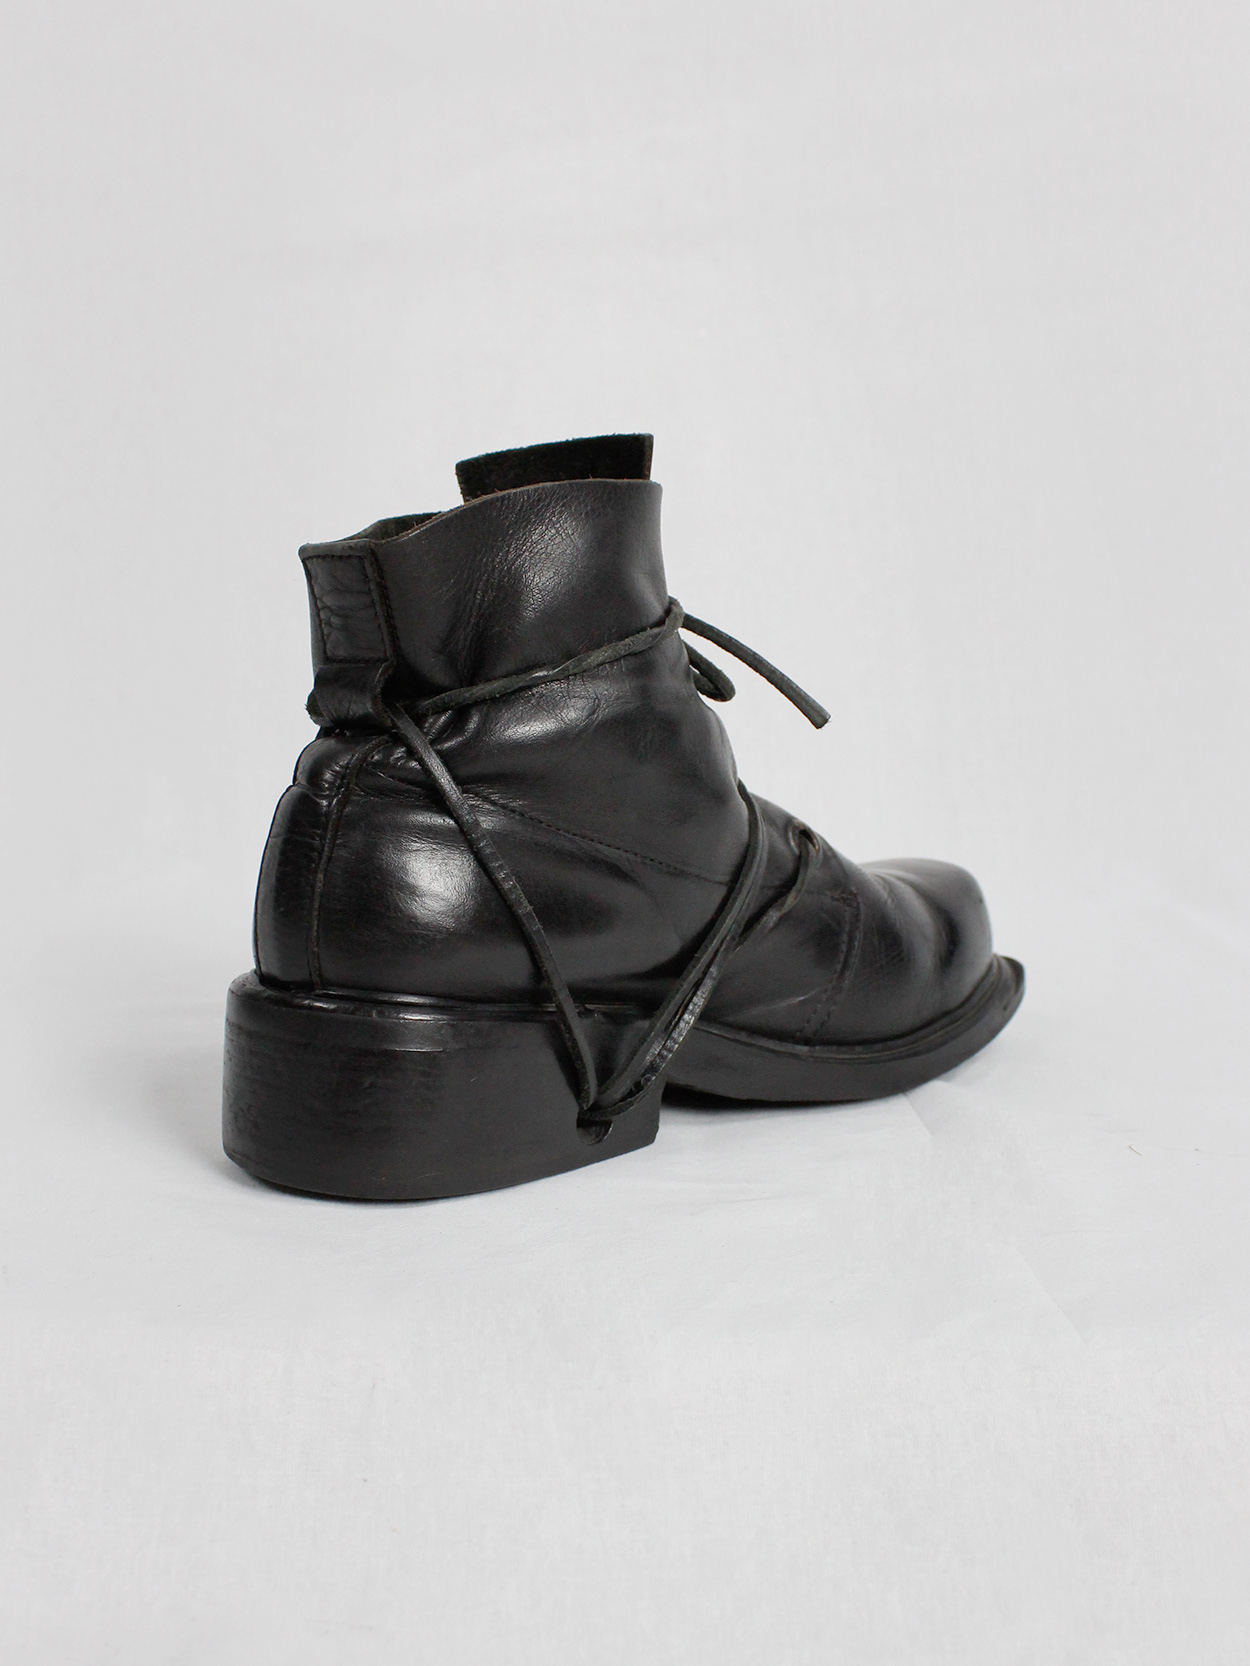 Dirk Bikkembergs black mountaineering boots with laces through the soles 1990s 90s (4)